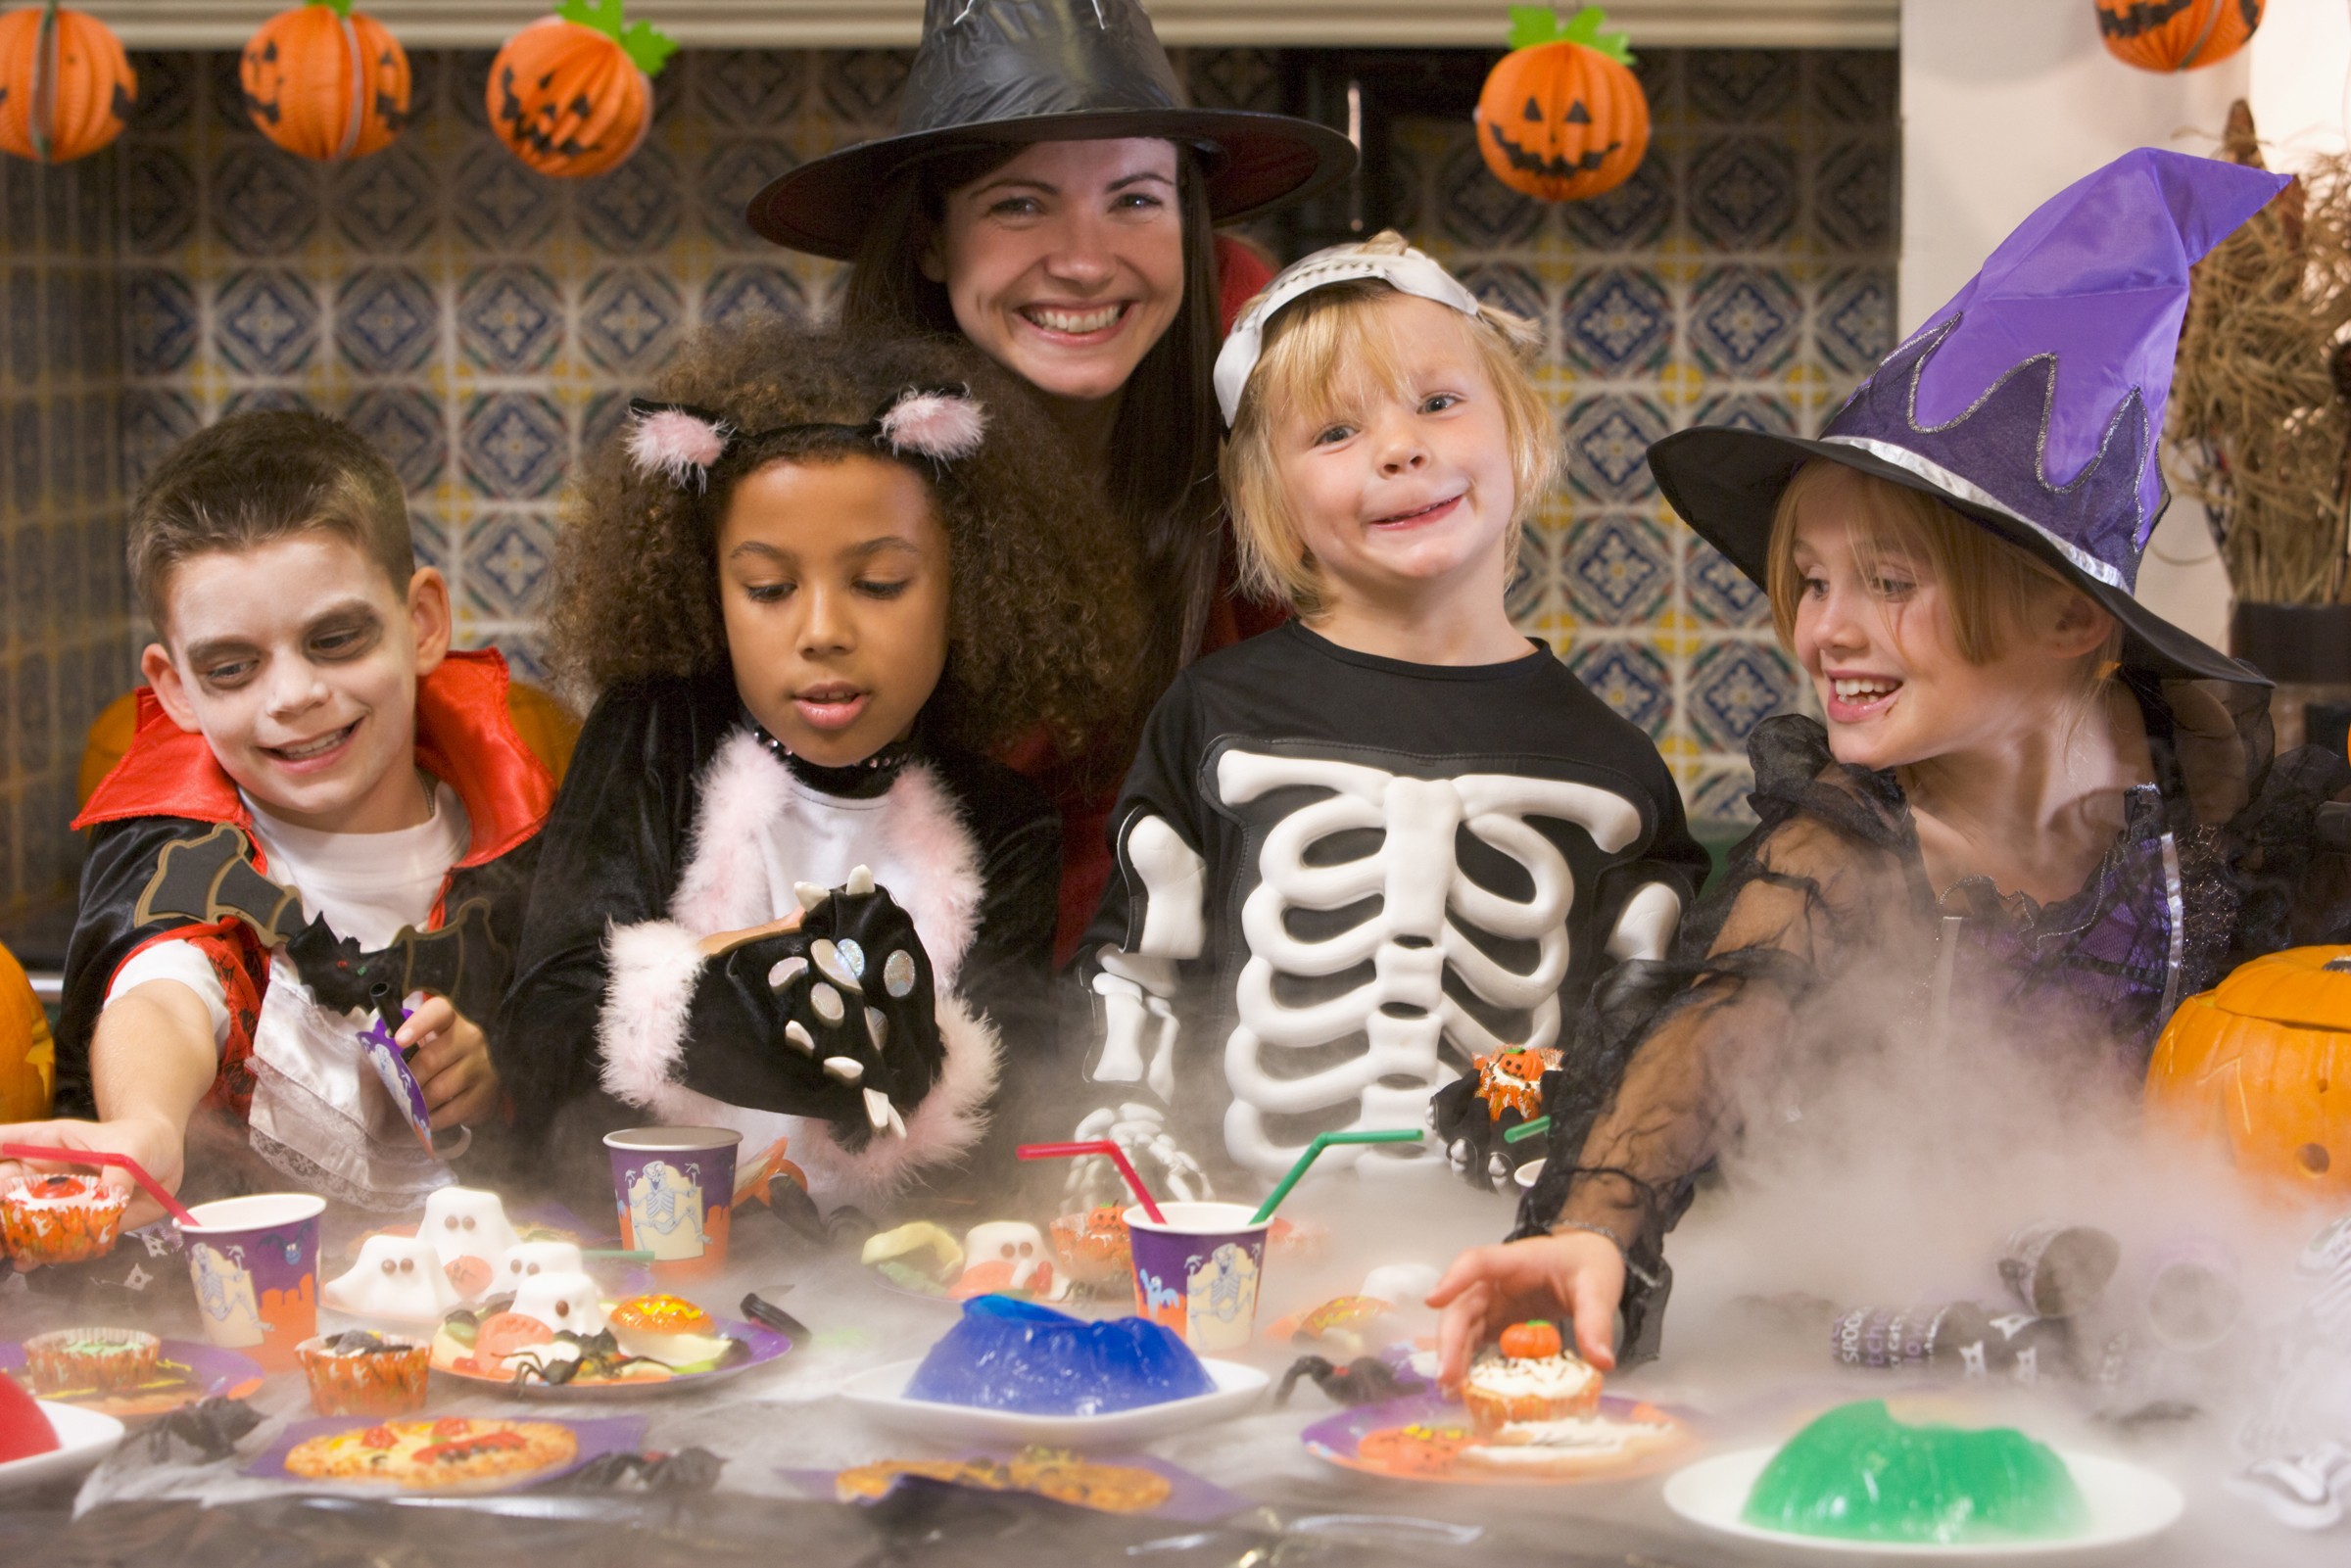 Four young friends and a woman at Halloween eating treats and sm